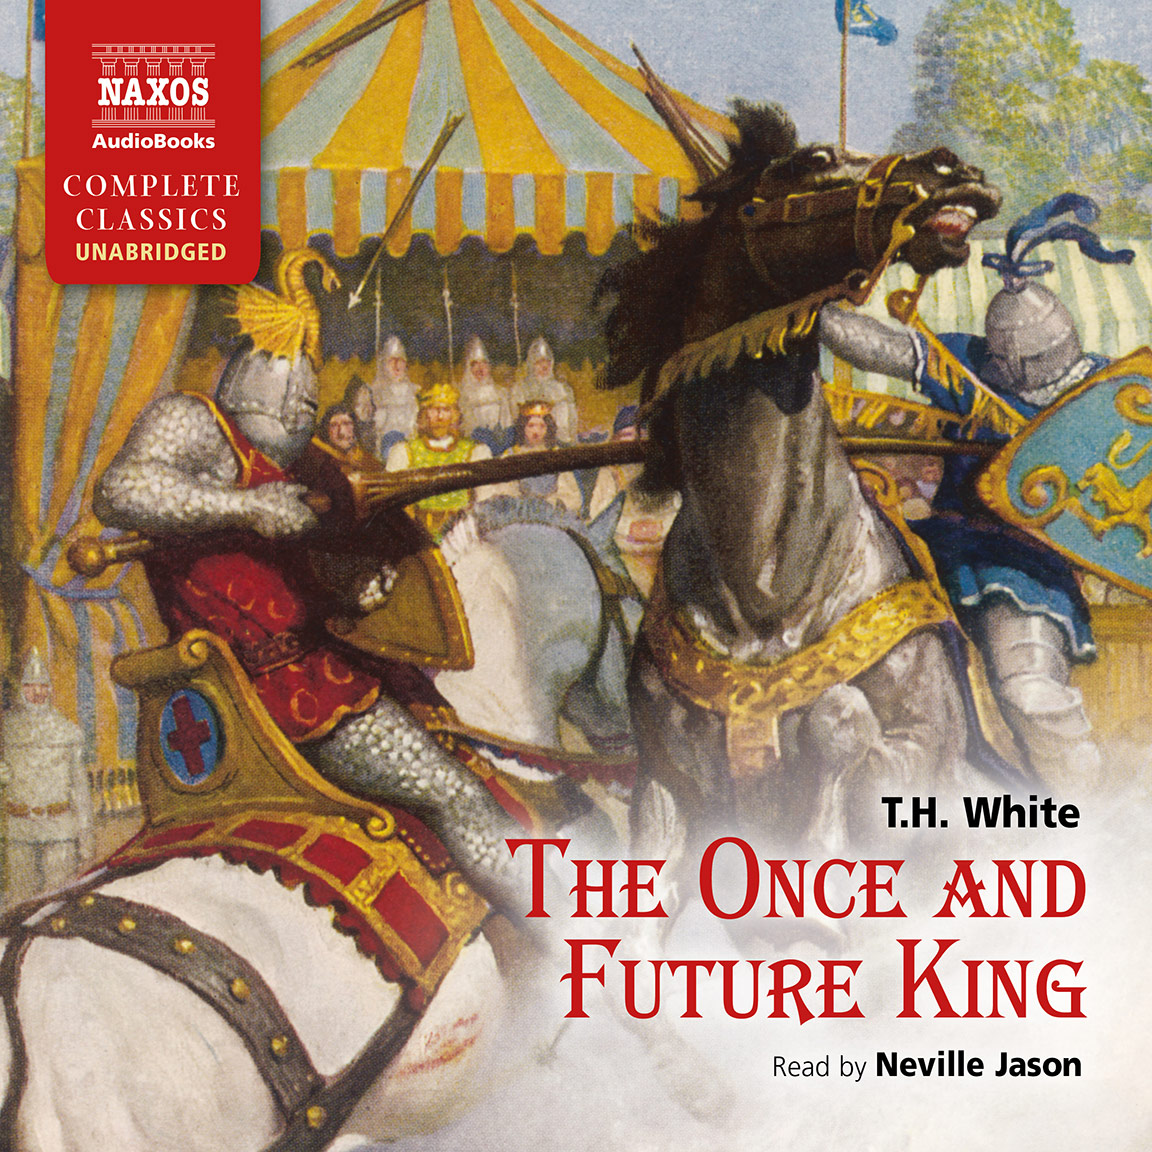 Once and Future King, The (unabridged) - Naxos AudioBooks